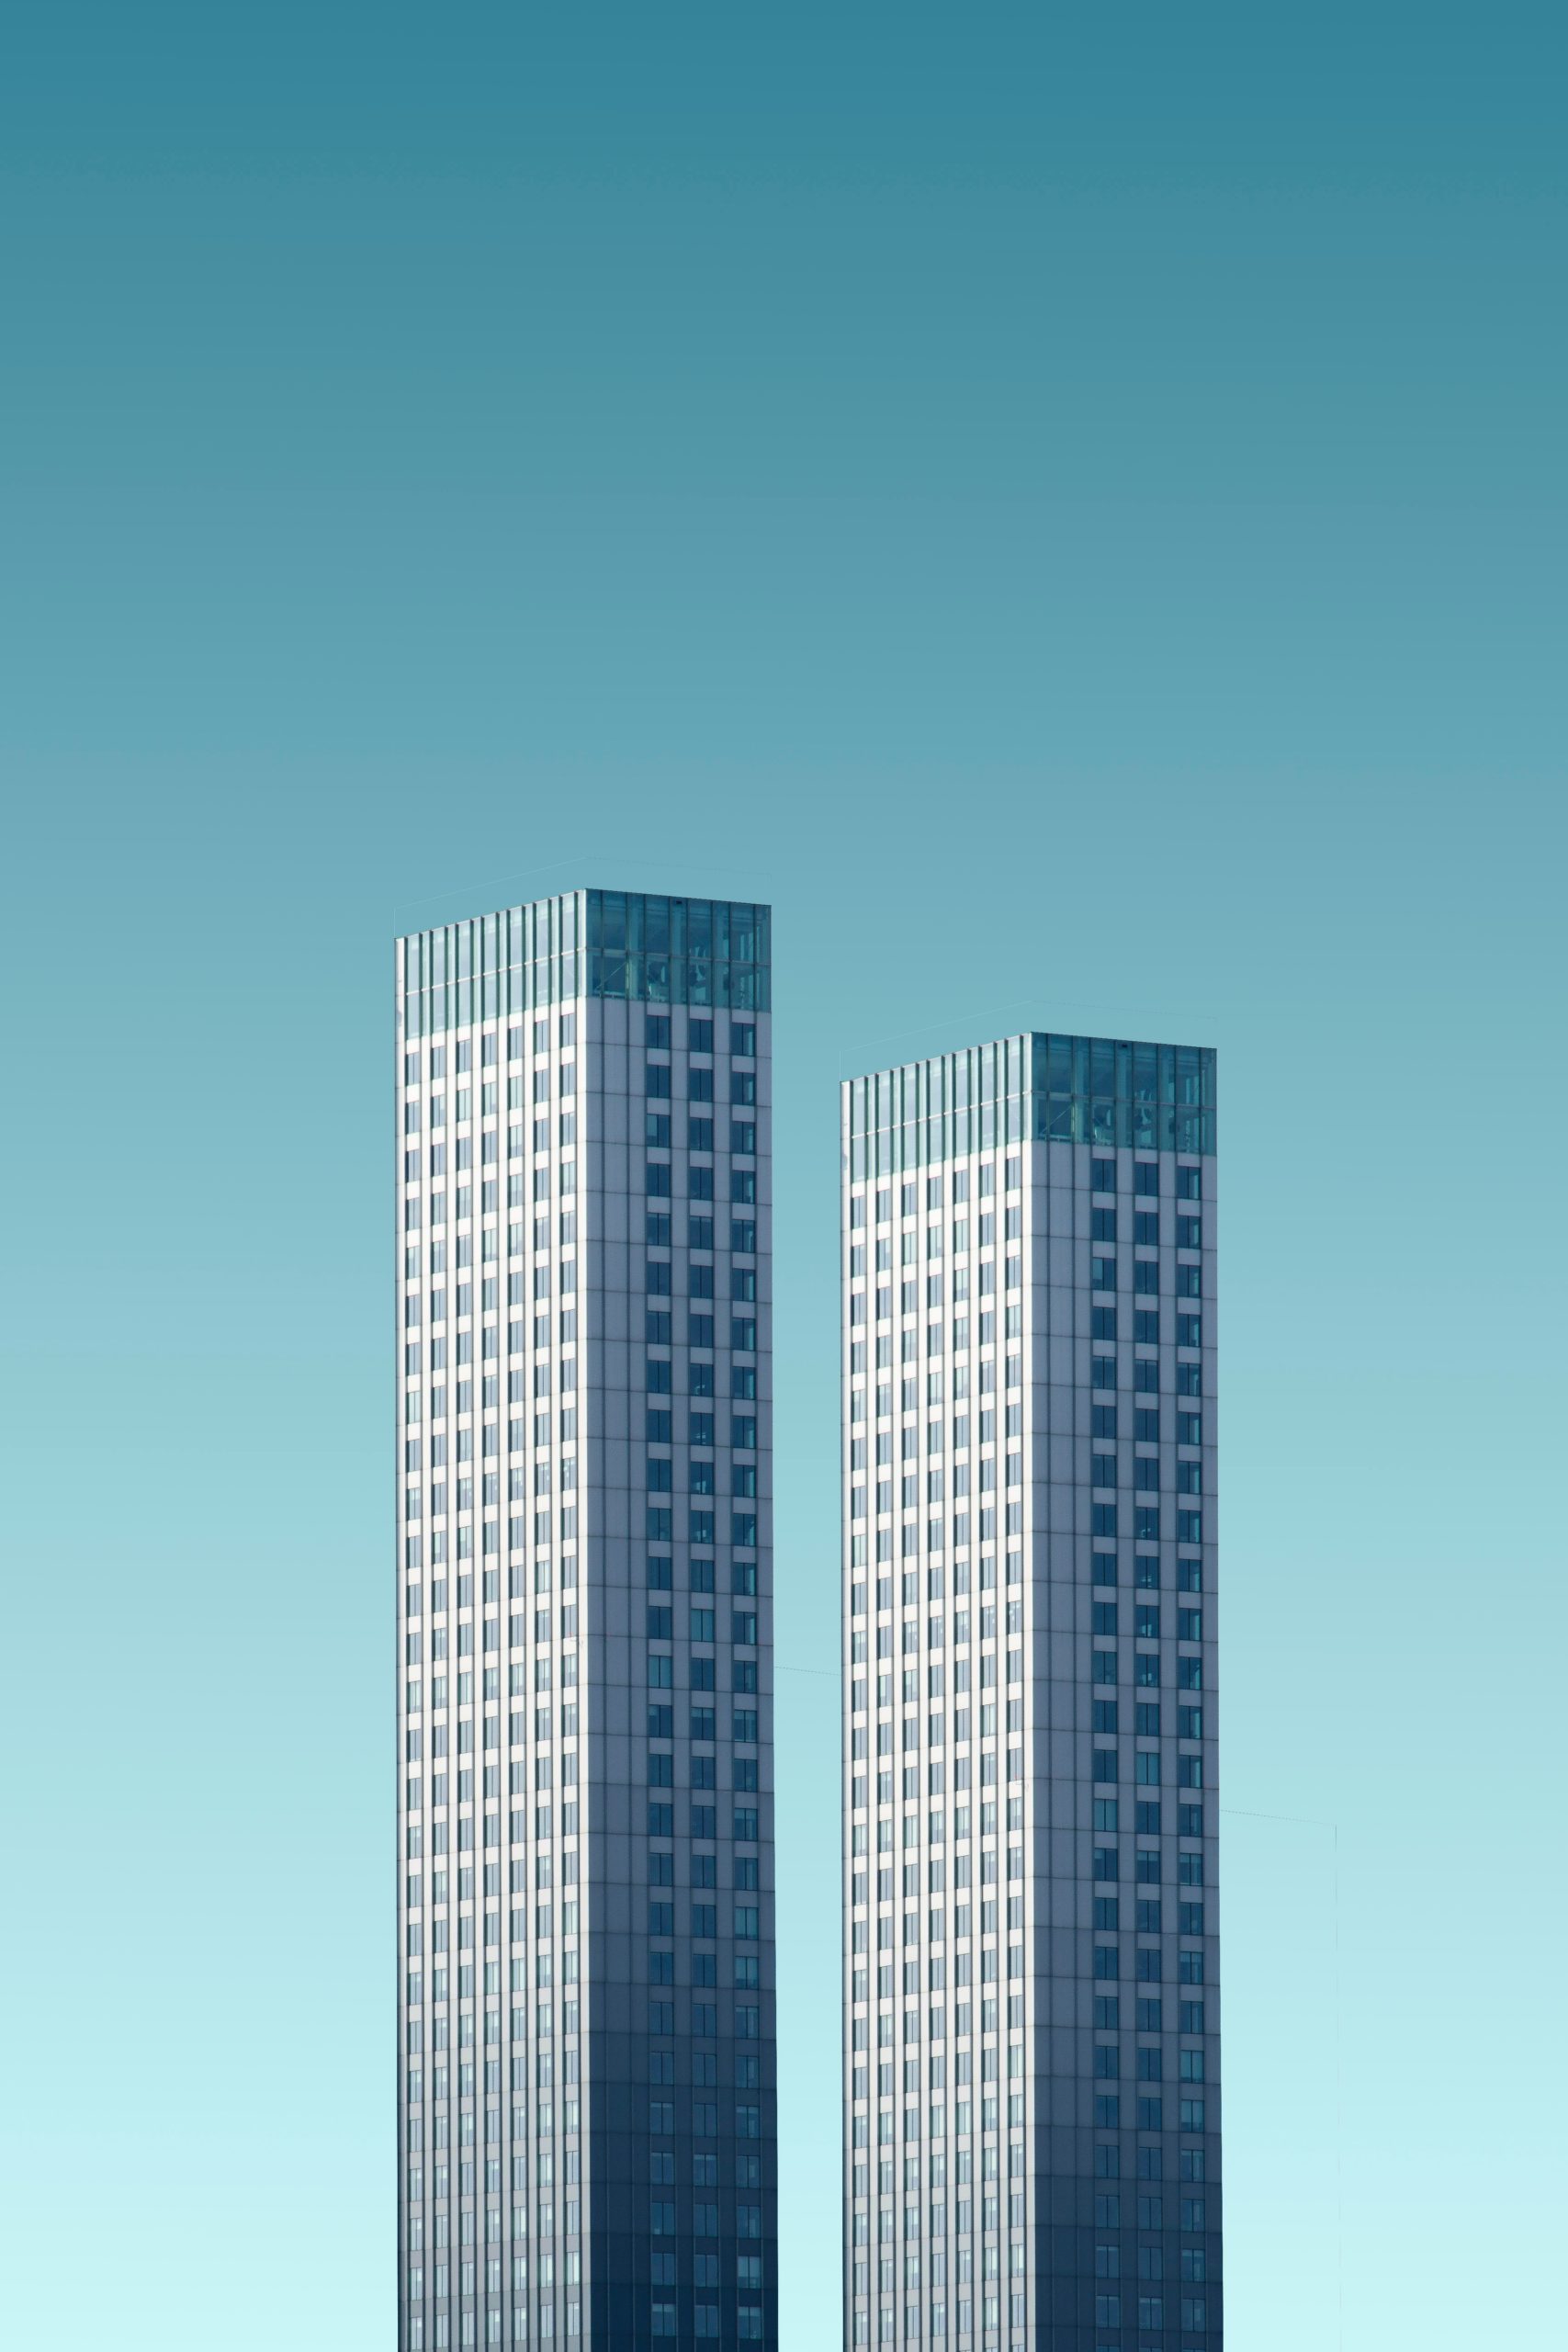 two teal-and-white skyscrapers